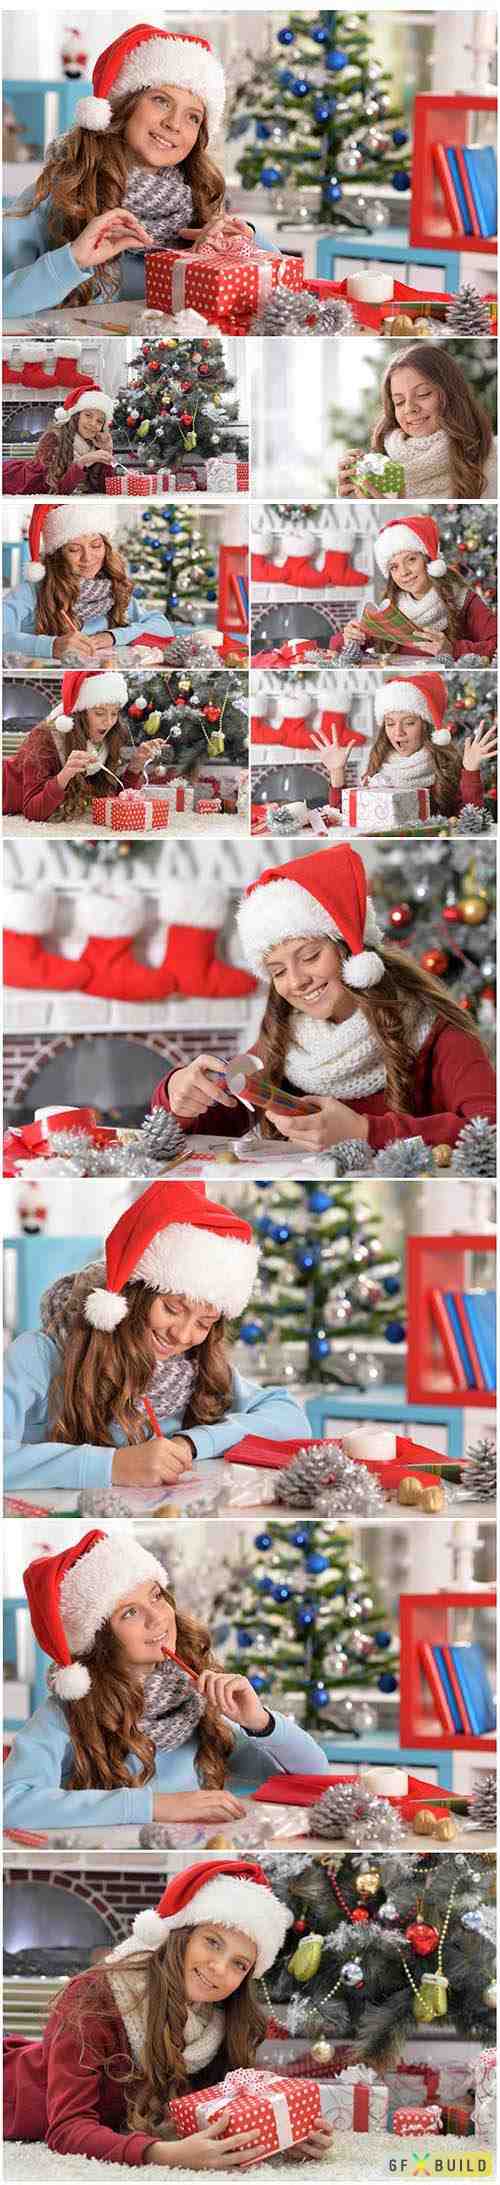 New Year and Christmas stock photos 85